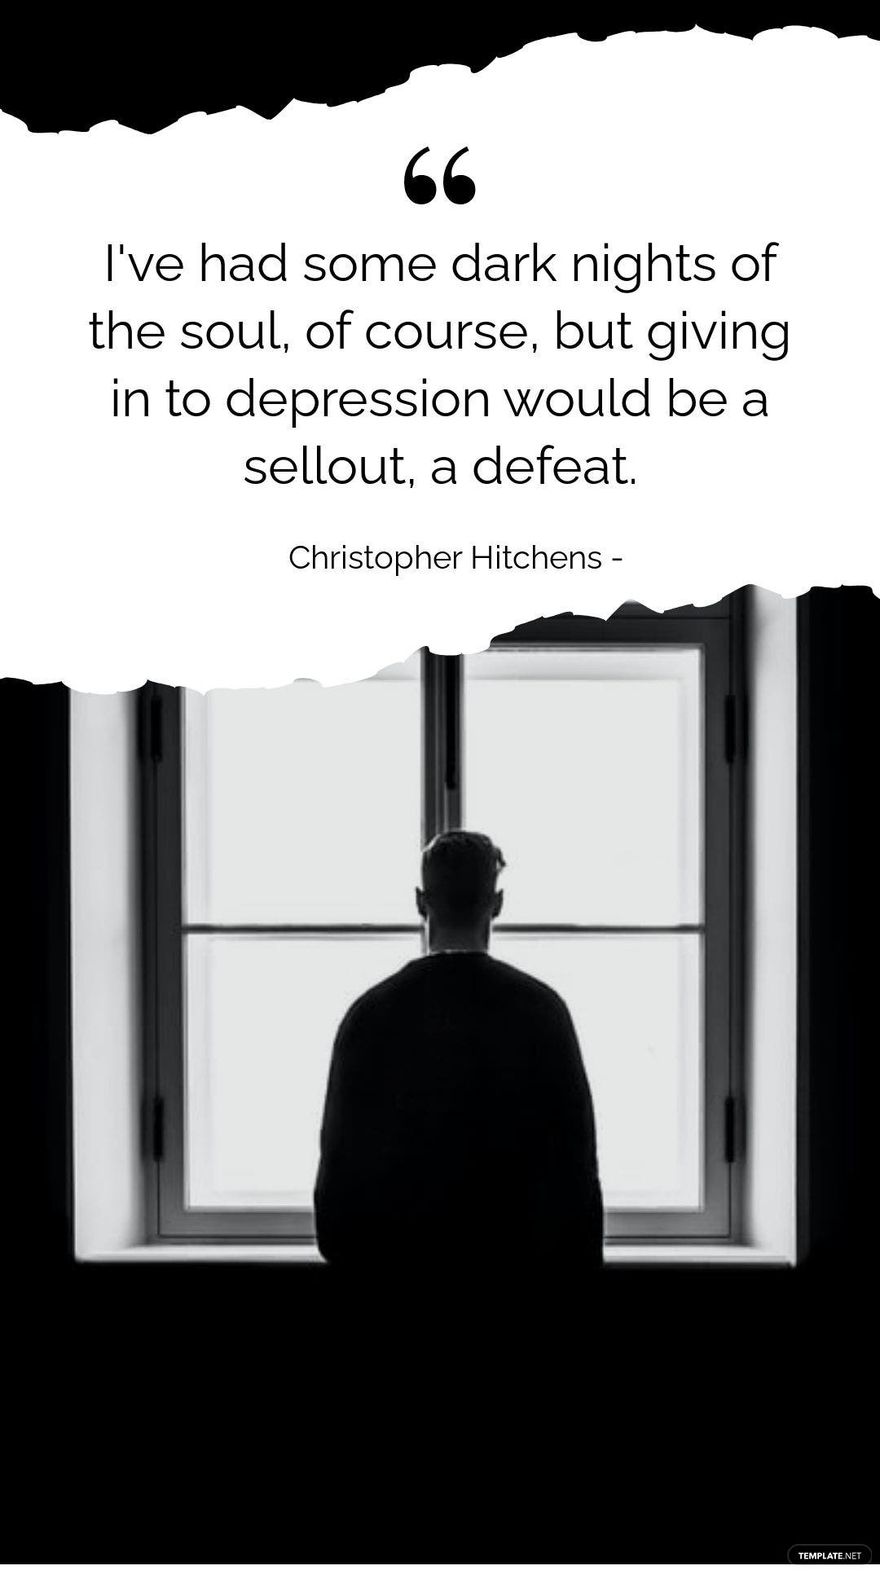 Christopher Hitchens - I've had some dark nights of the soul, of course, but giving in to depression would be a sellout, a defeat.